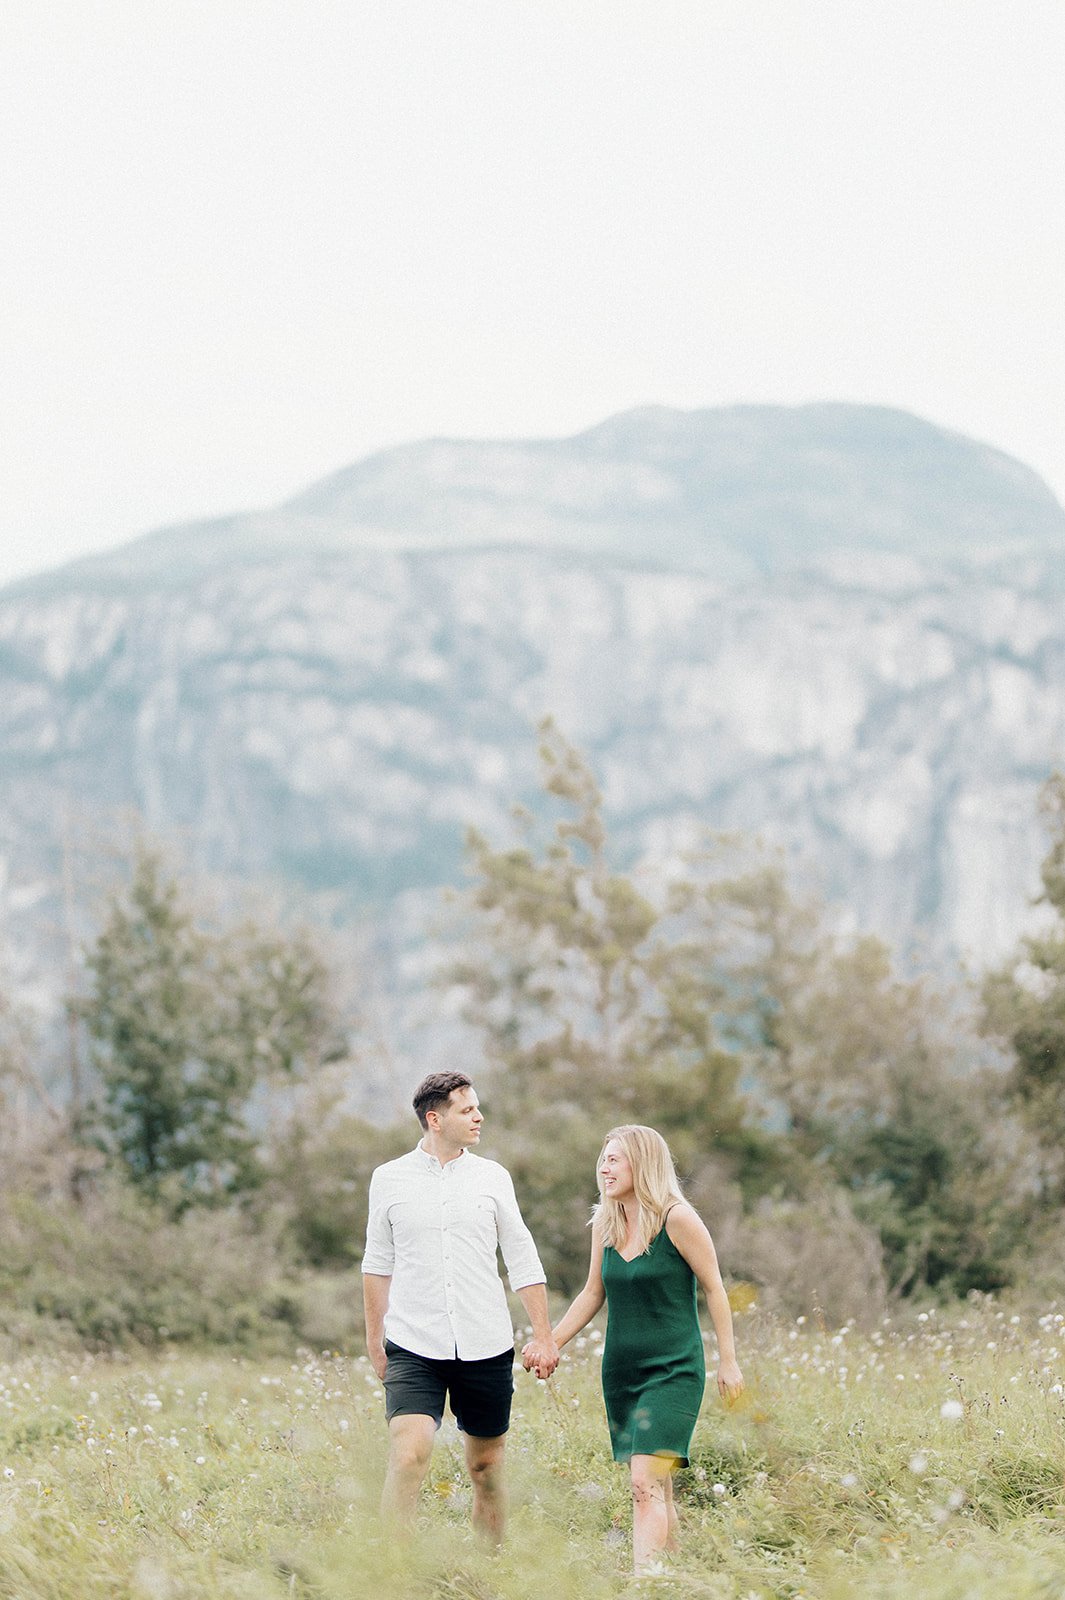 A young and beautiful engaged couple hold hands as they stroll through a grassy field in front of a large mountain in Squamish, BC.